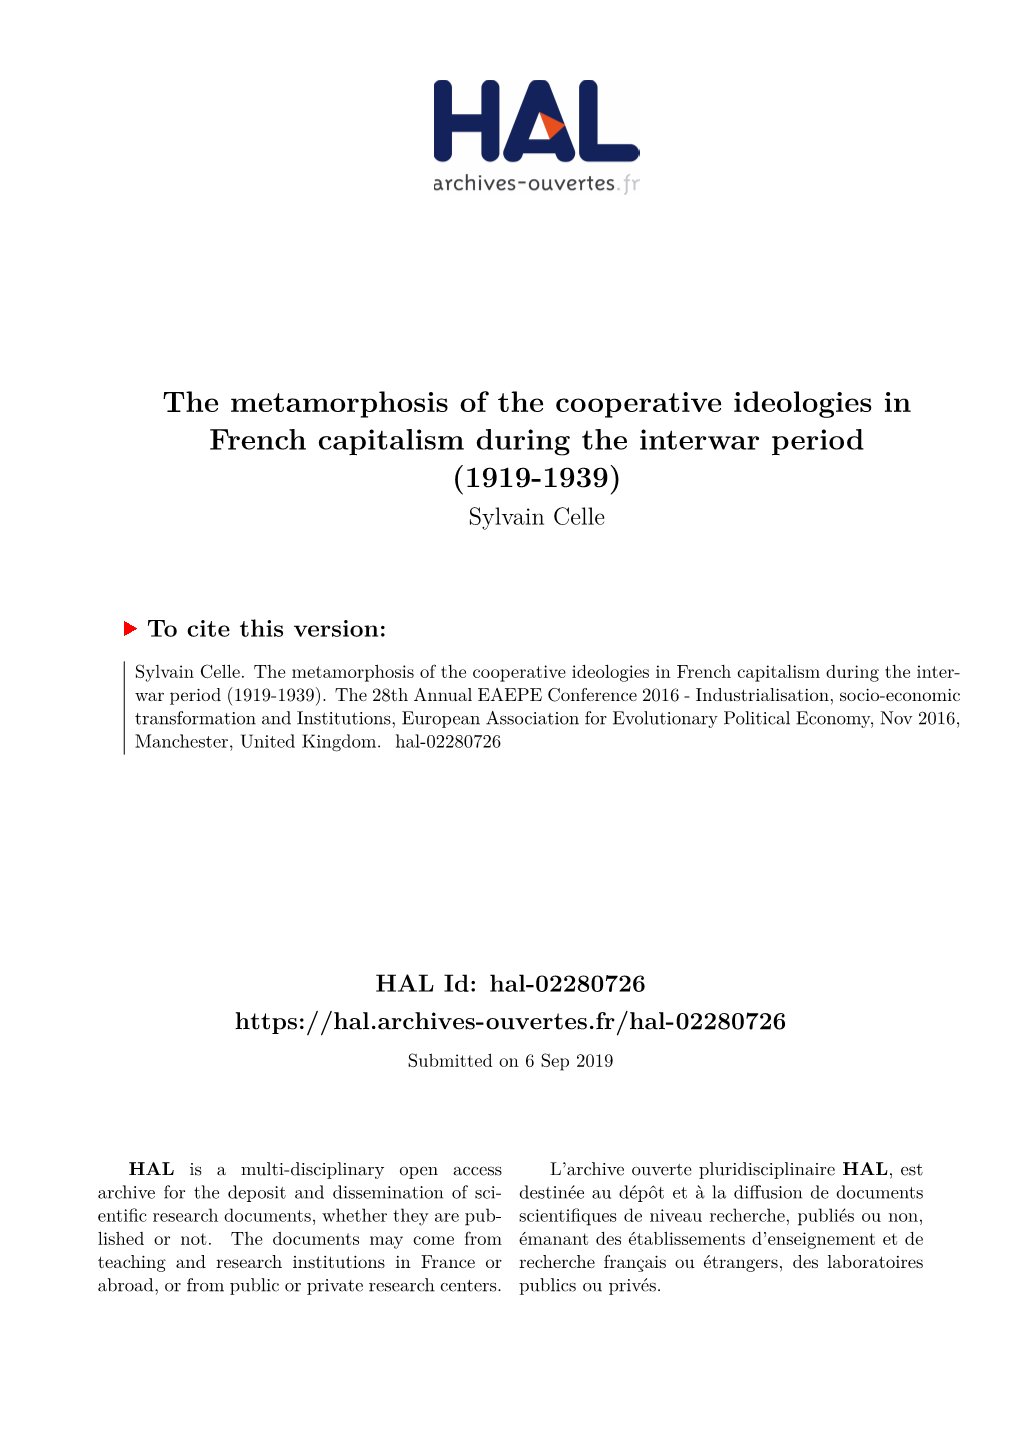 The Metamorphosis of the Cooperative Ideologies in French Capitalism During the Interwar Period (1919-1939) Sylvain Celle